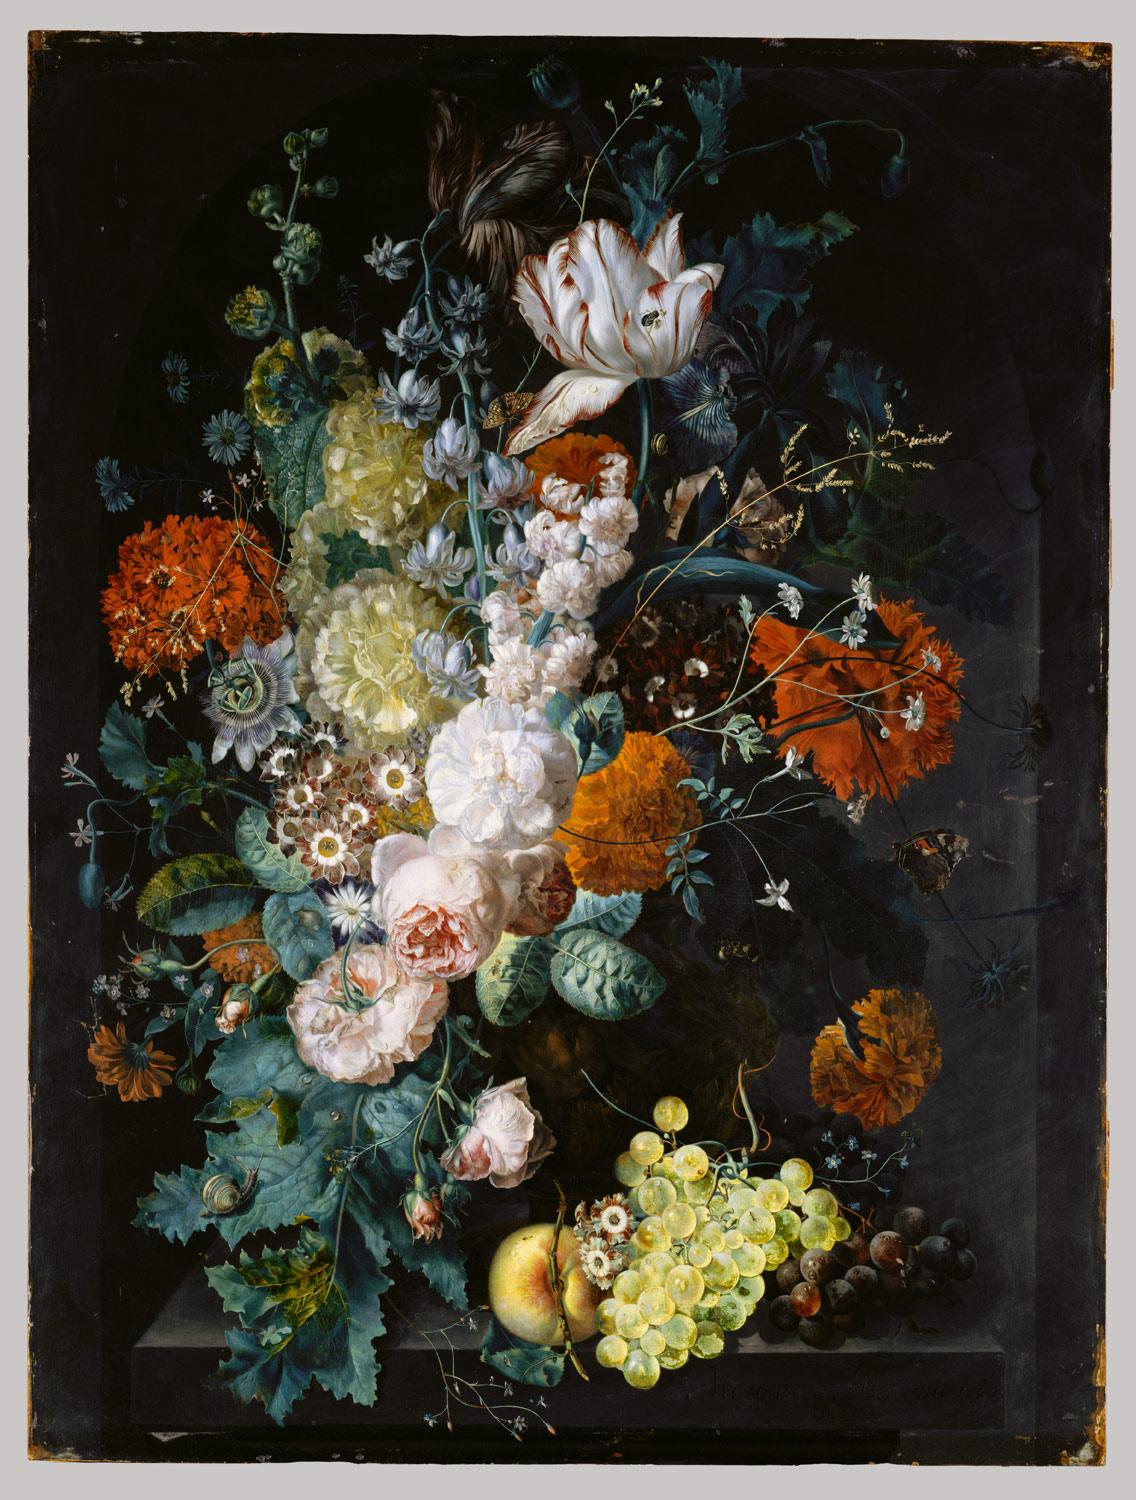 “A Vase of Flowers,” 1716, by Margareta Haverman. Oil on wood, 31 1/4 inches by 23 3/4 inches. Purchase, 1871. (The Metropolitan Museum of Art, New York)